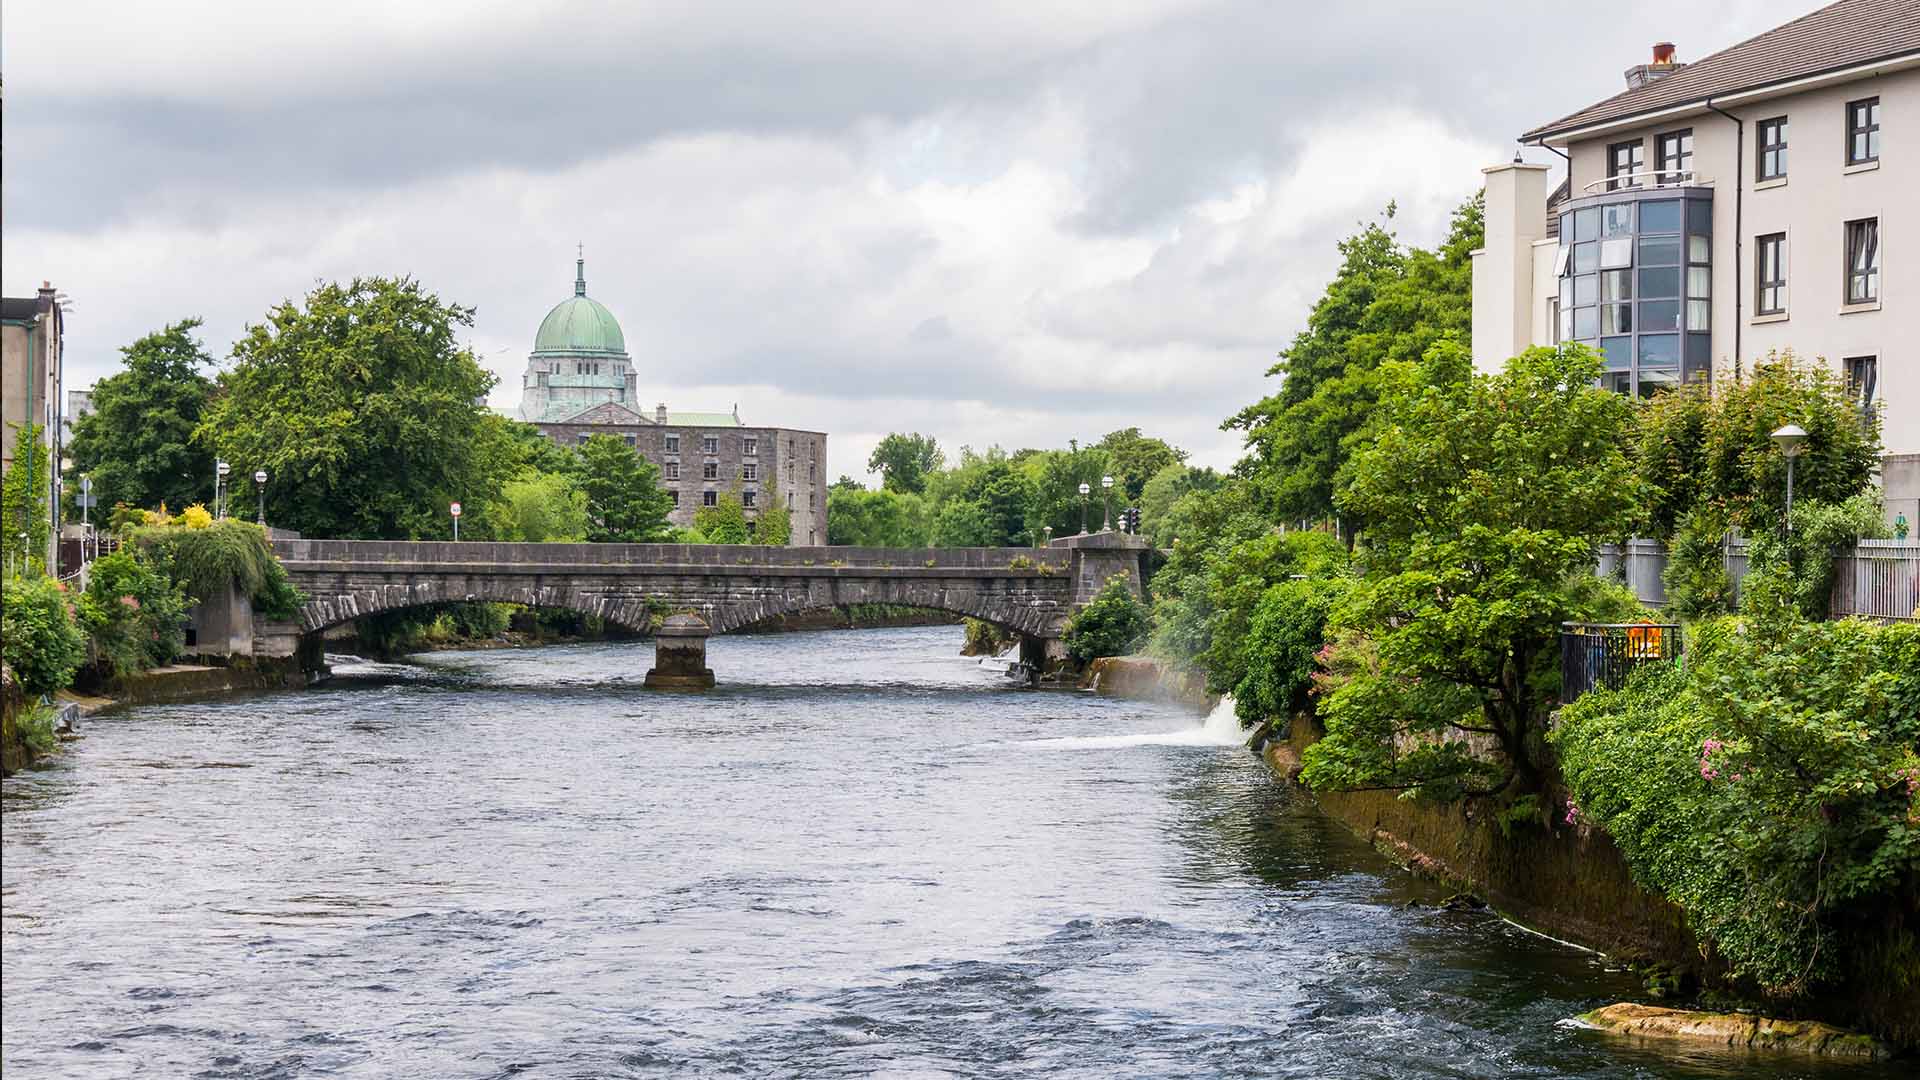 Corrib river in Galway city